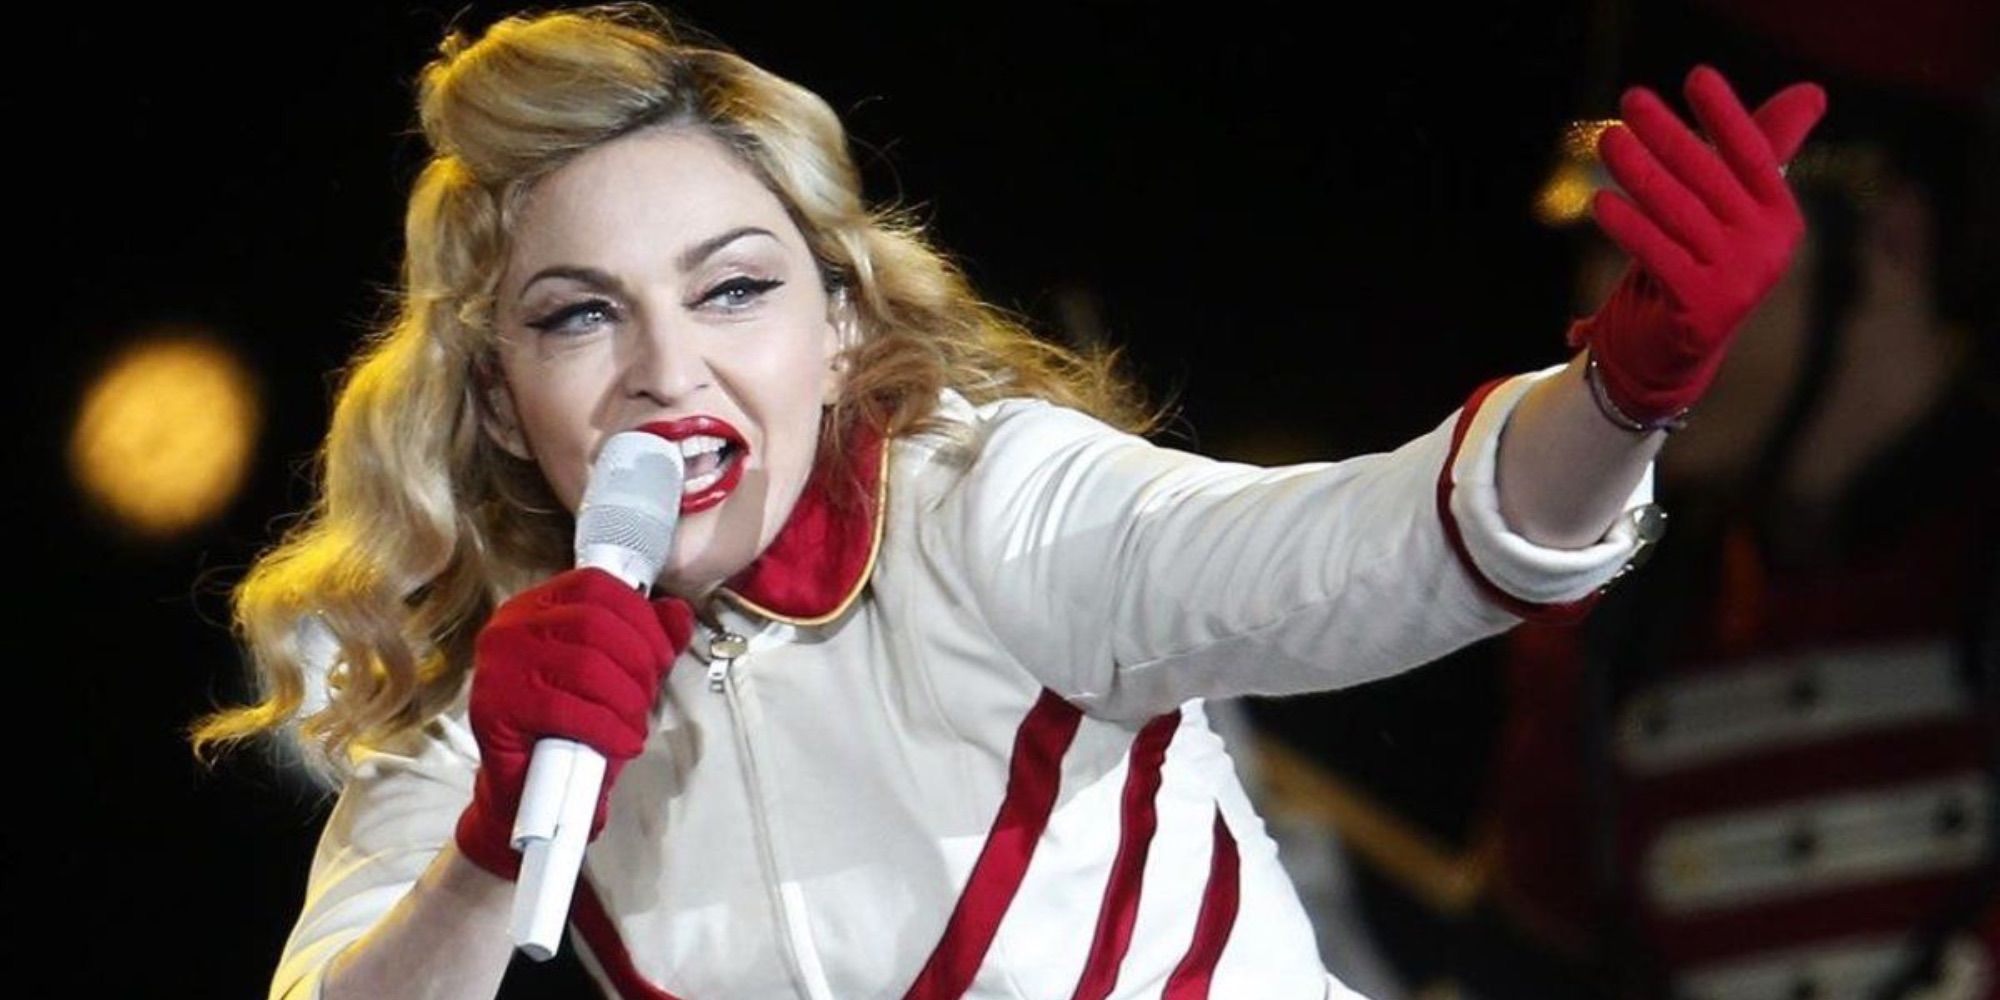 madonna singing onstage in white and red outfit